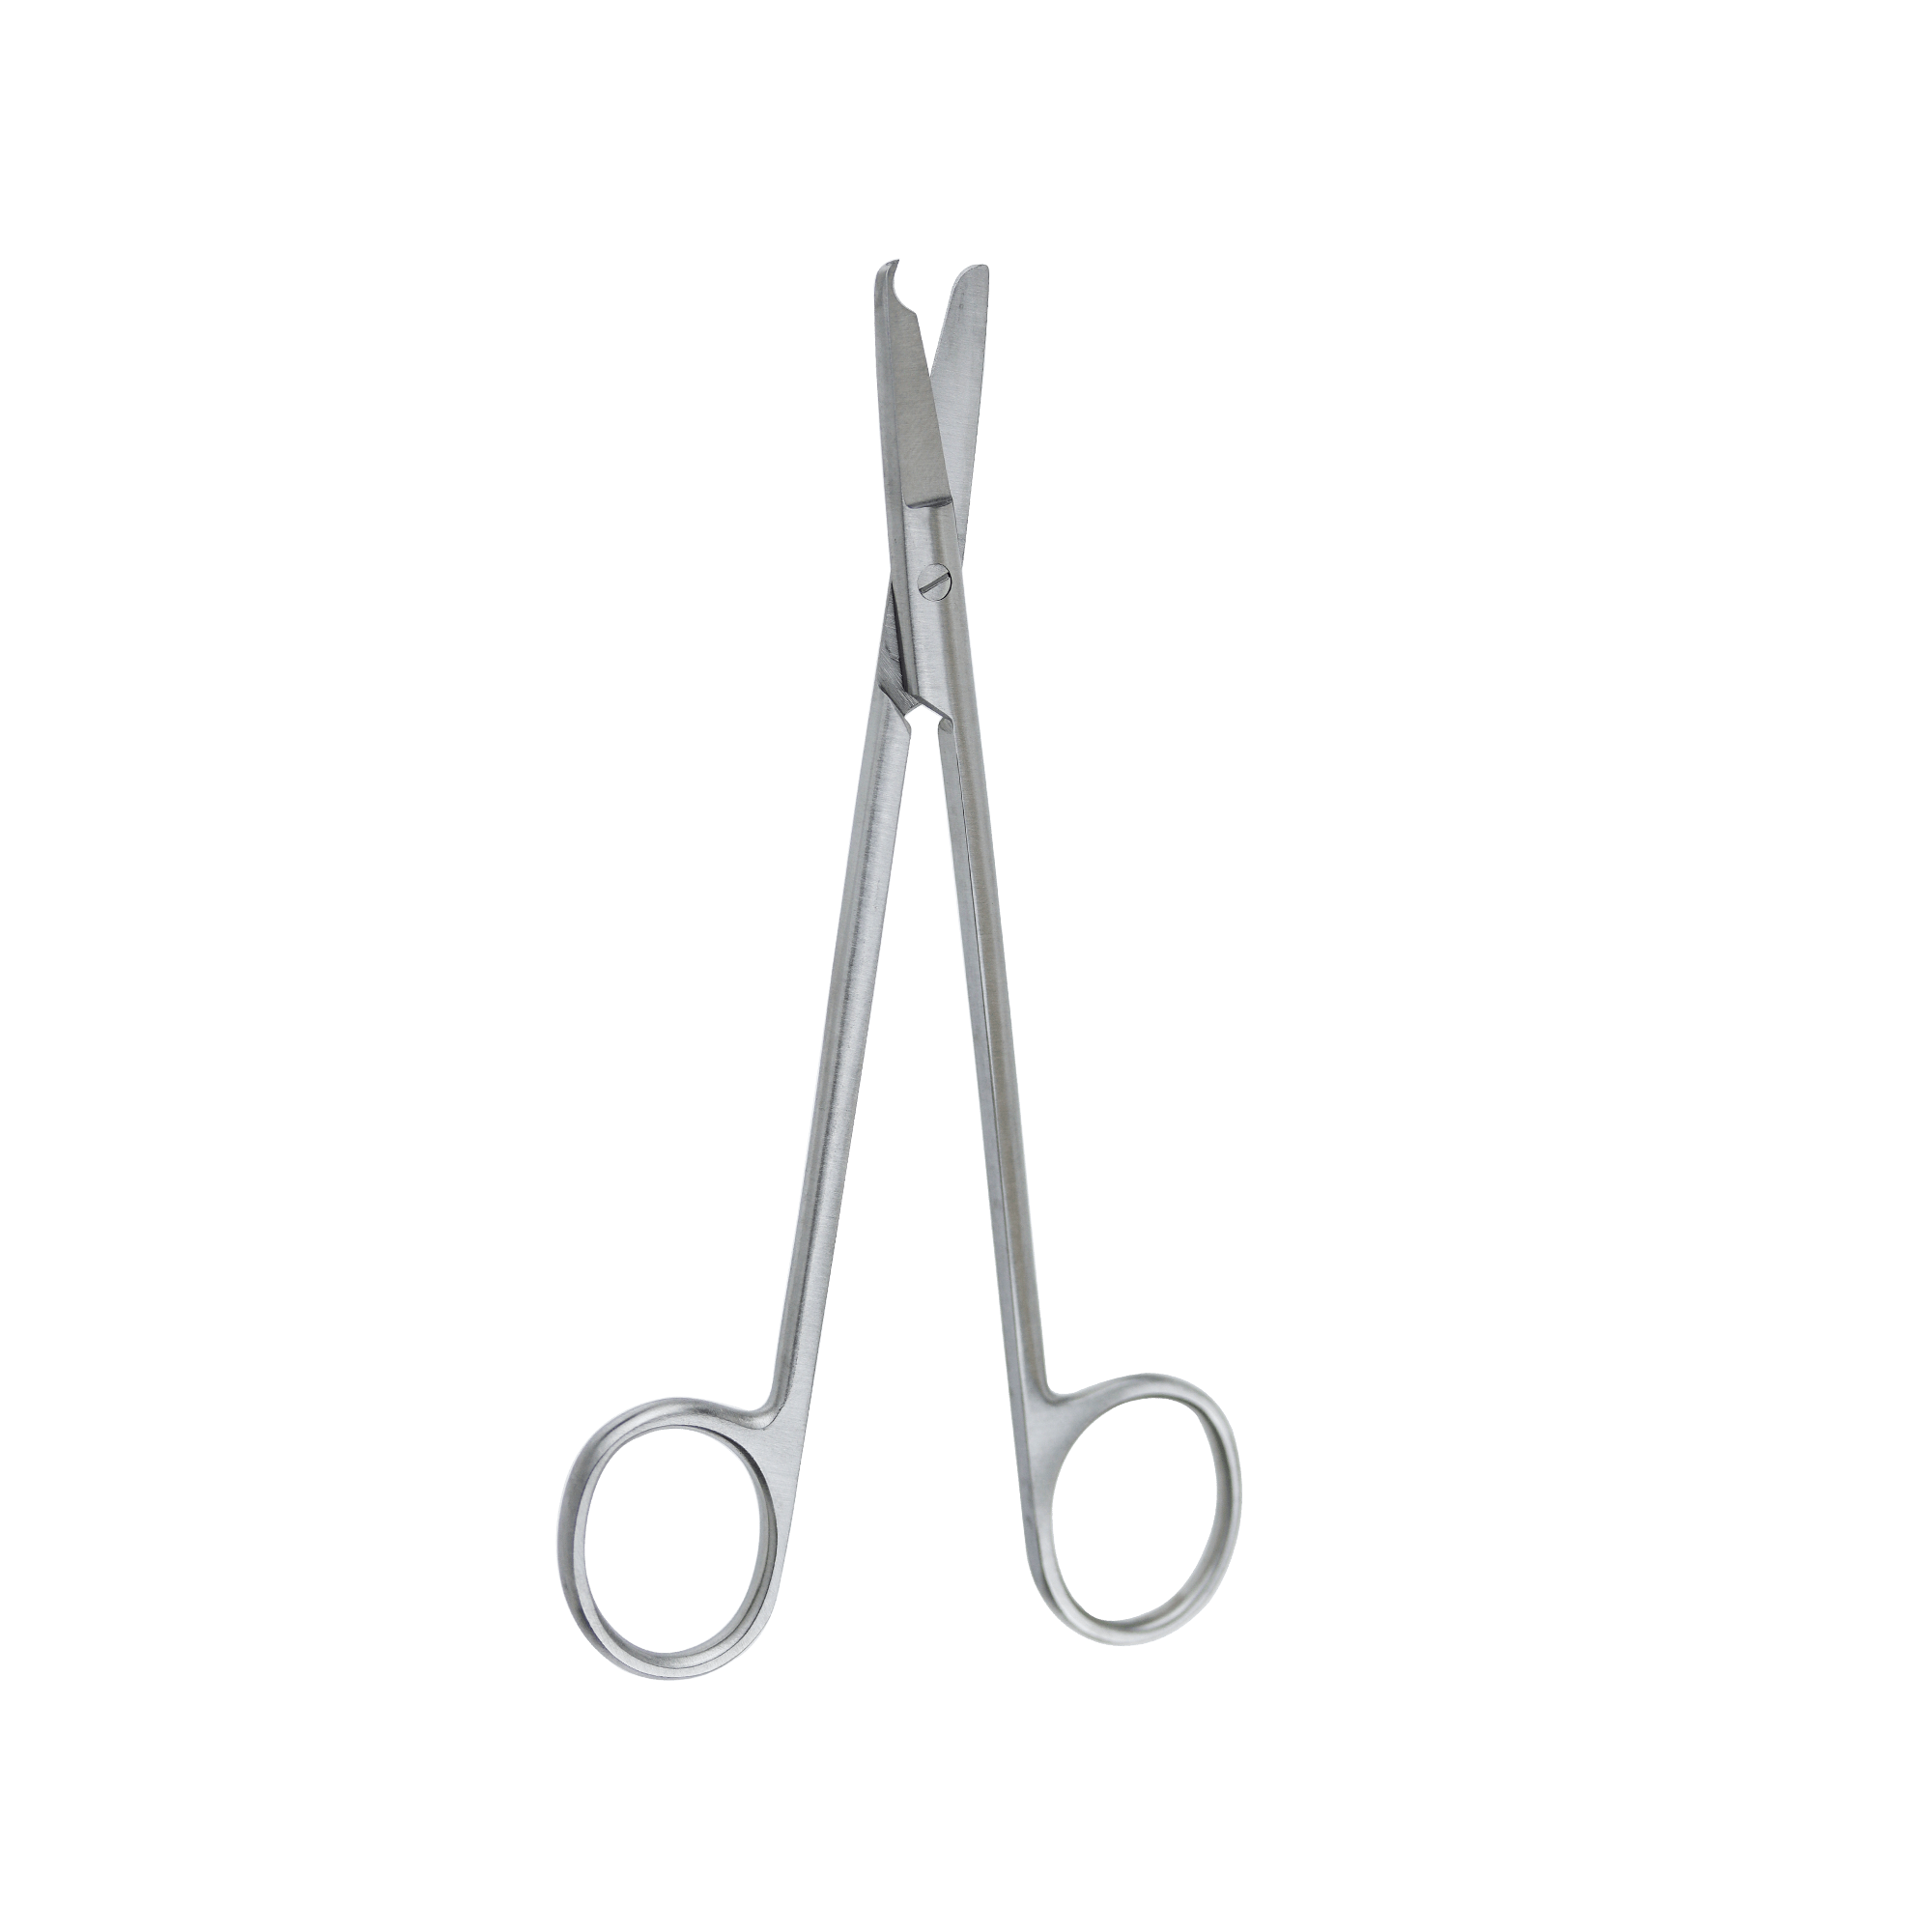 Surgical Suture Scissors - Long Suture Scissor 15Cm Hooked end to lift suture